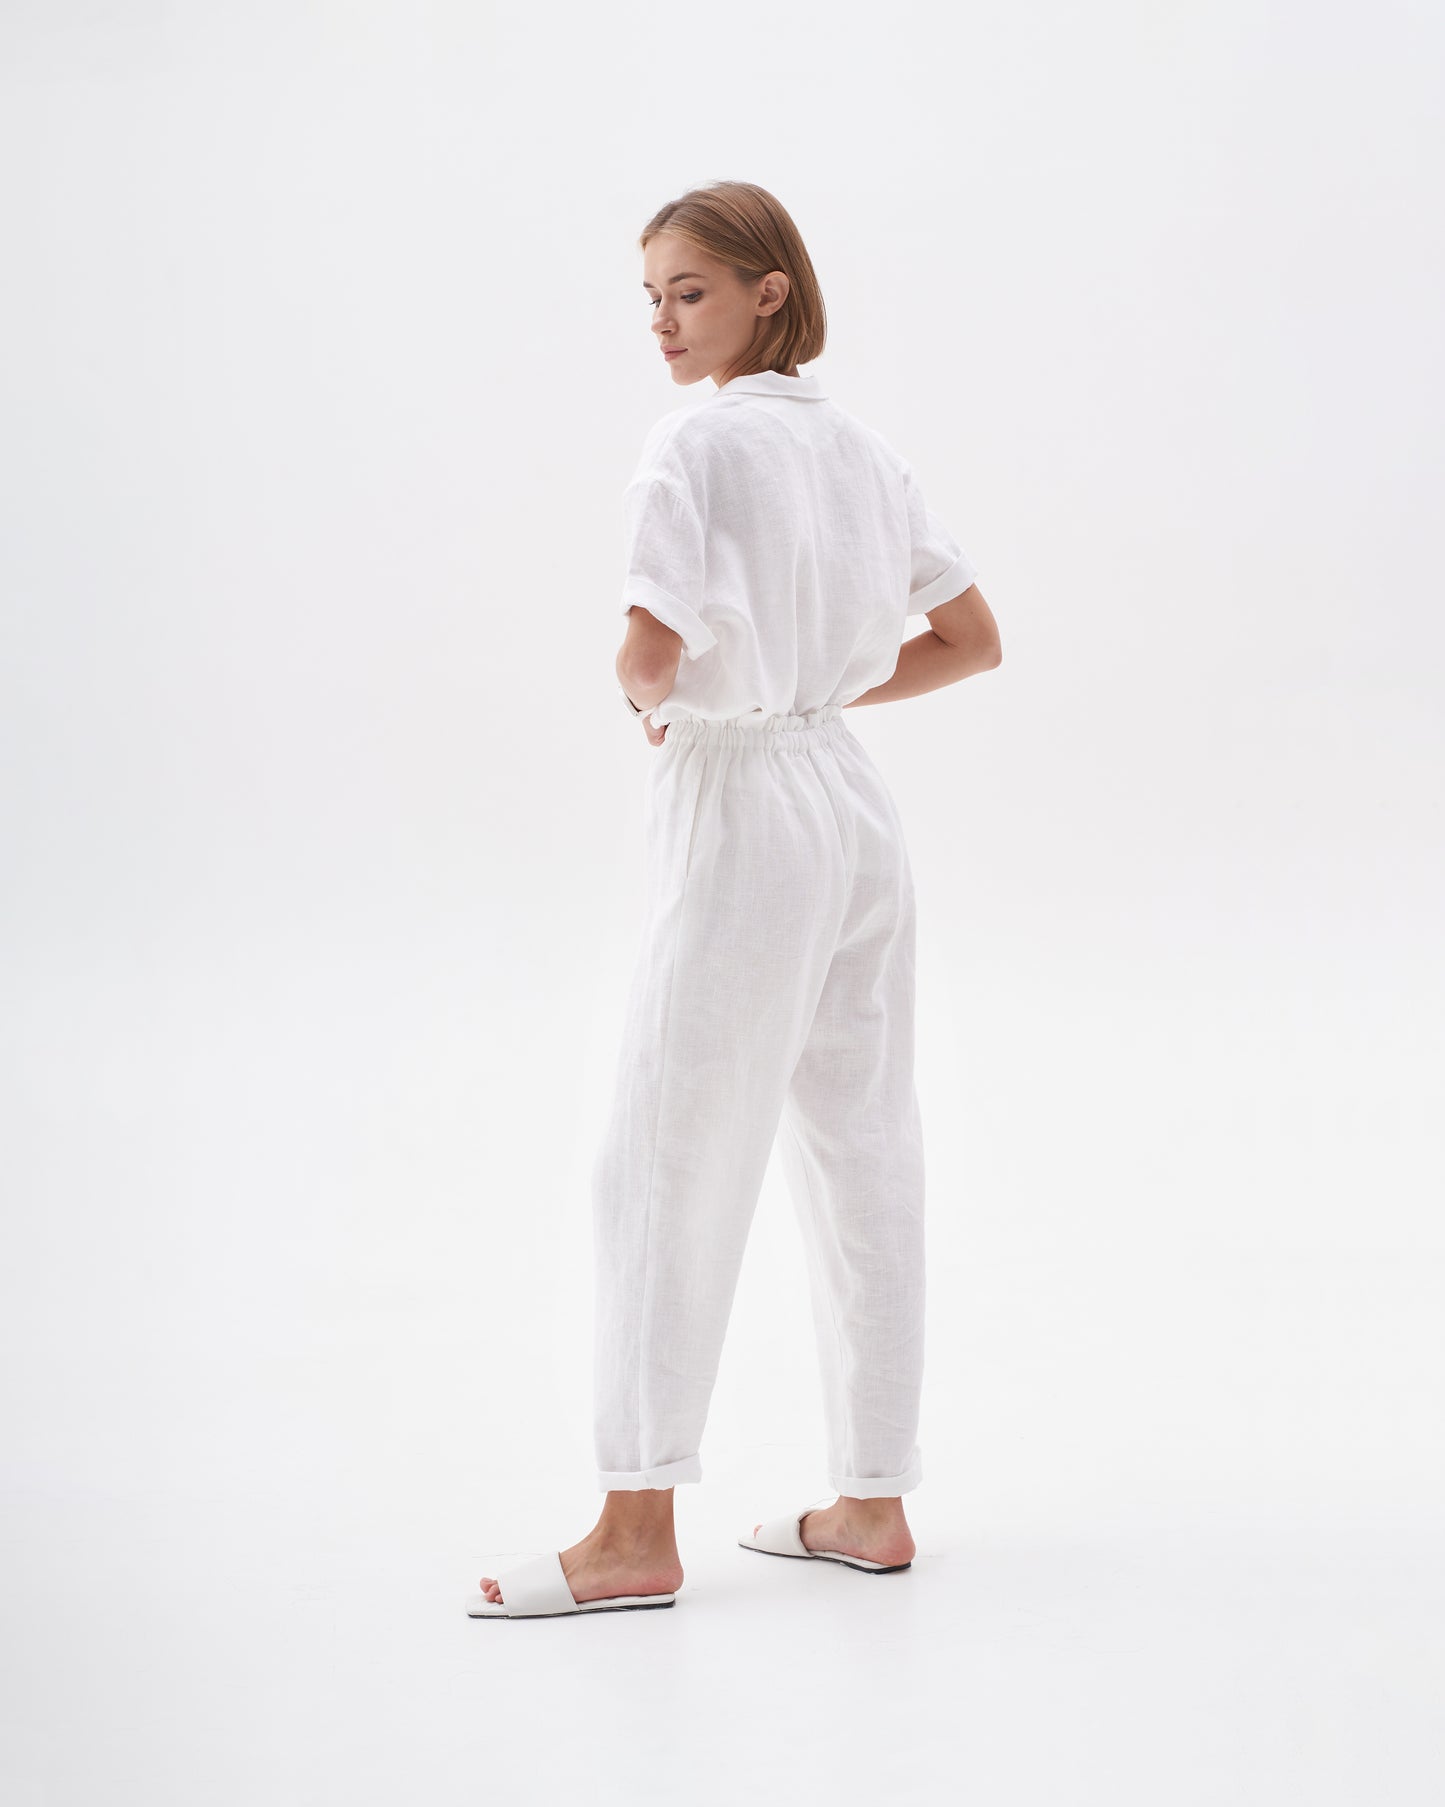 P A N T S 100% washed linen | white